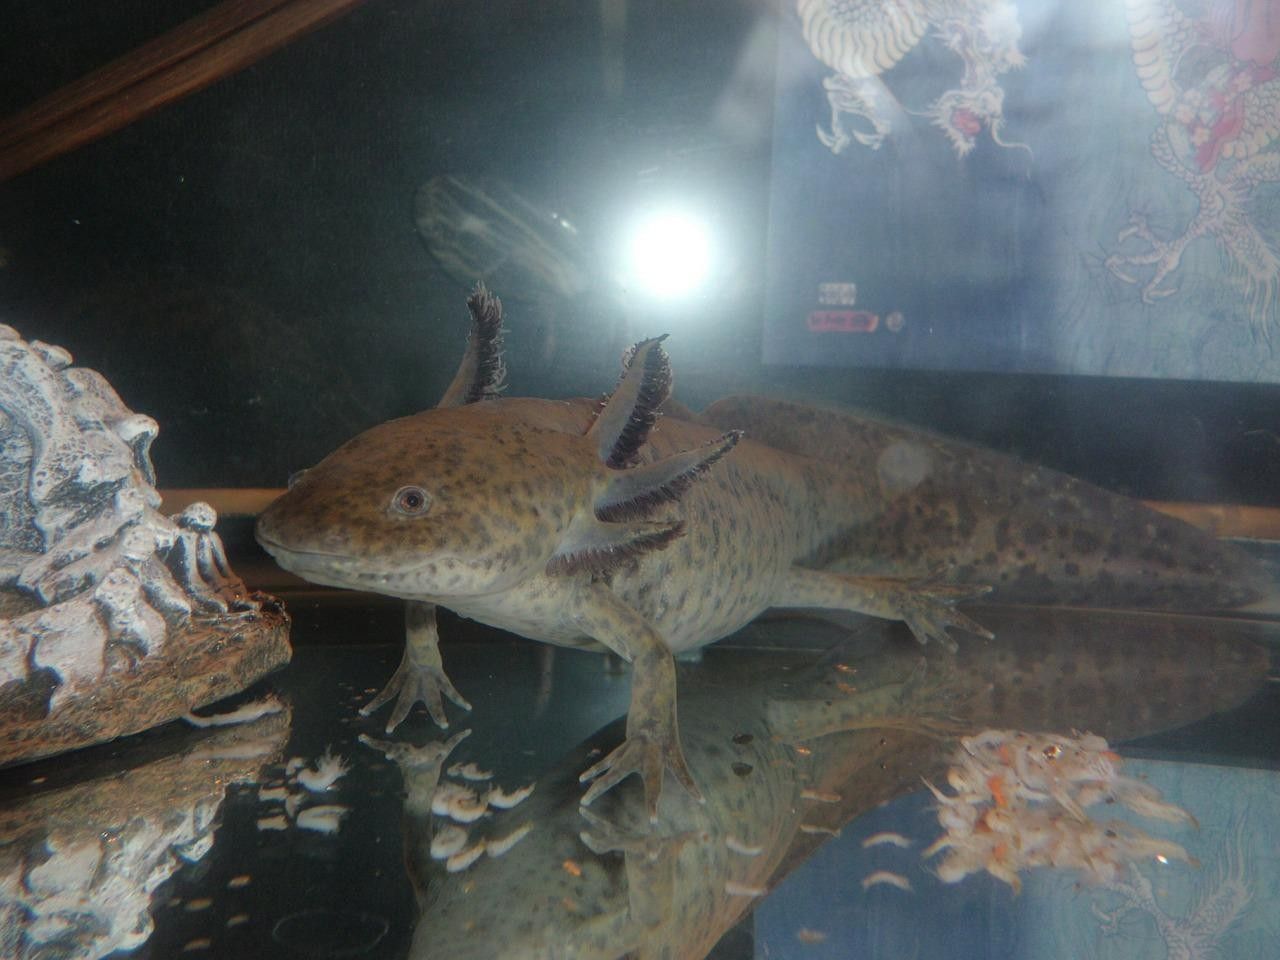 Axolotl names will vary slightly based on the nature of the pet animal species.